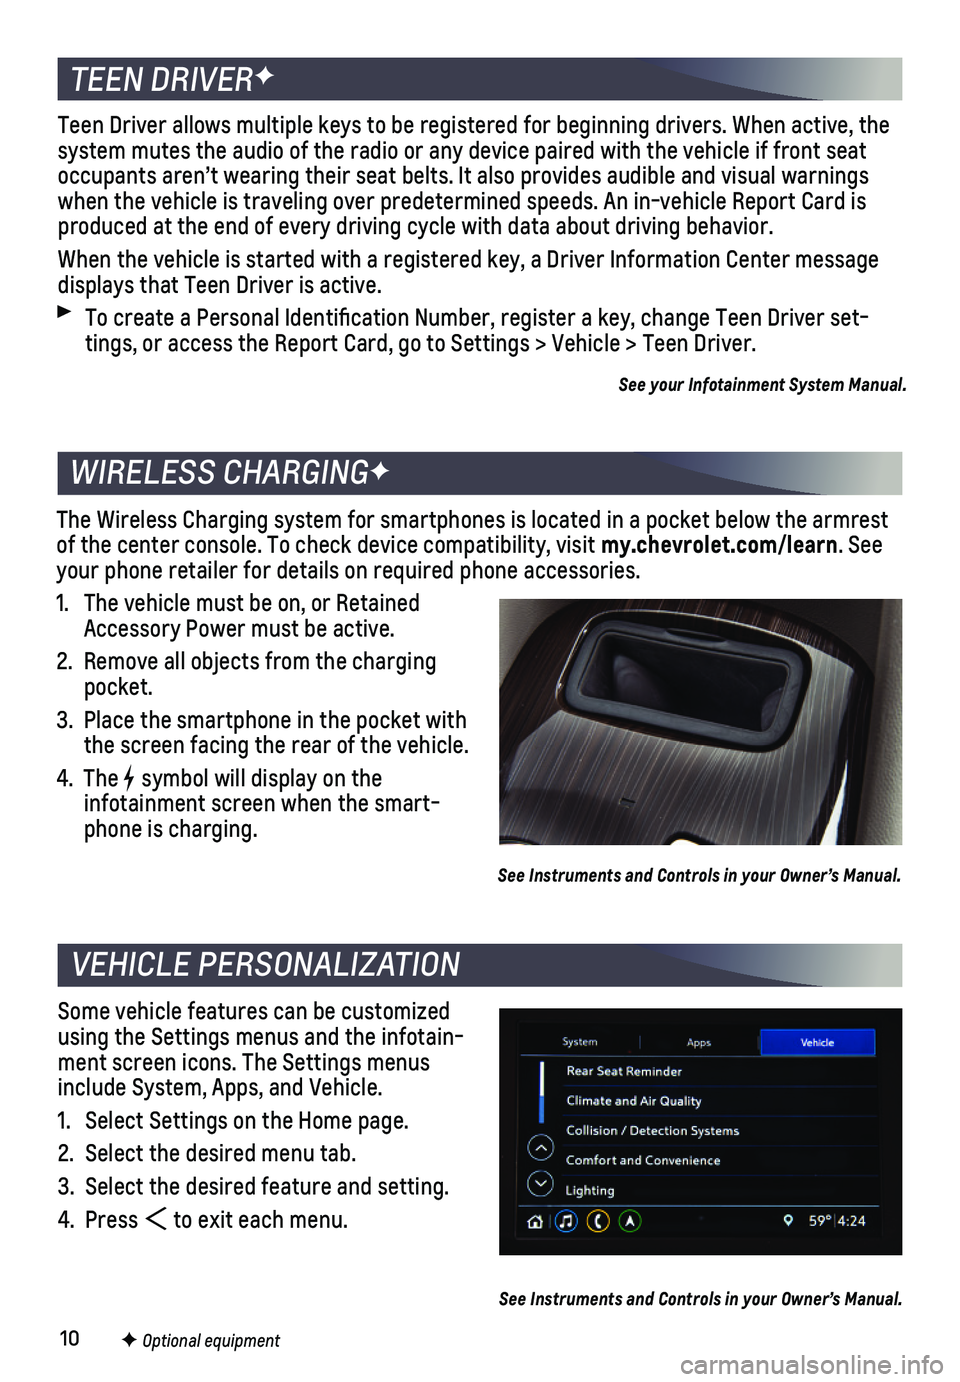 CHEVROLET MALIBU 2019  Get To Know Guide 10F Optional equipment 
Some vehicle features can be customized using the Settings menus and the infotain-ment screen icons. The Settings menus include System, Apps, and Vehicle.
1. Select Settings on